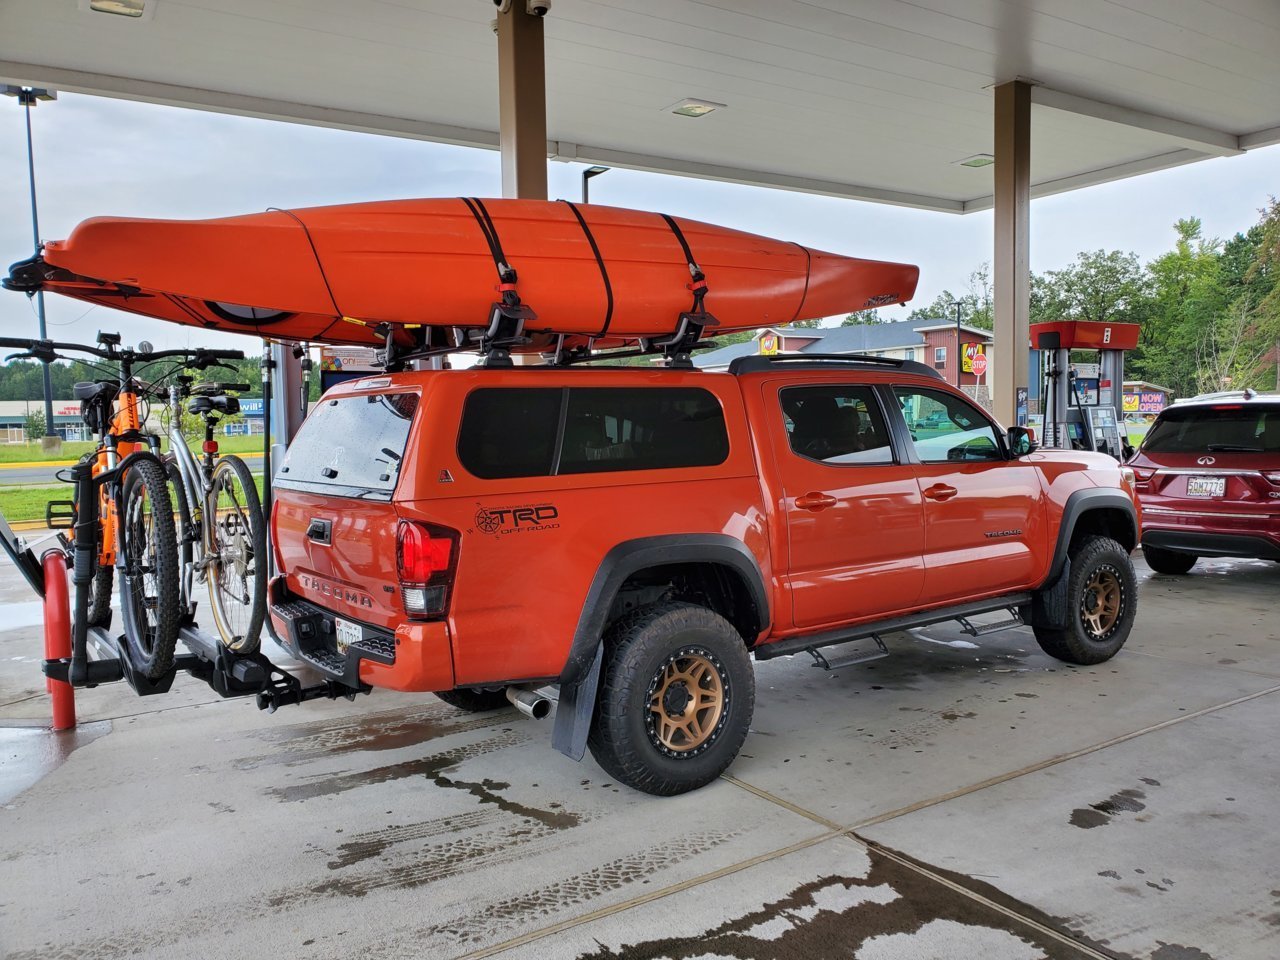 Anyone installed roof rack tracks onto their topper?